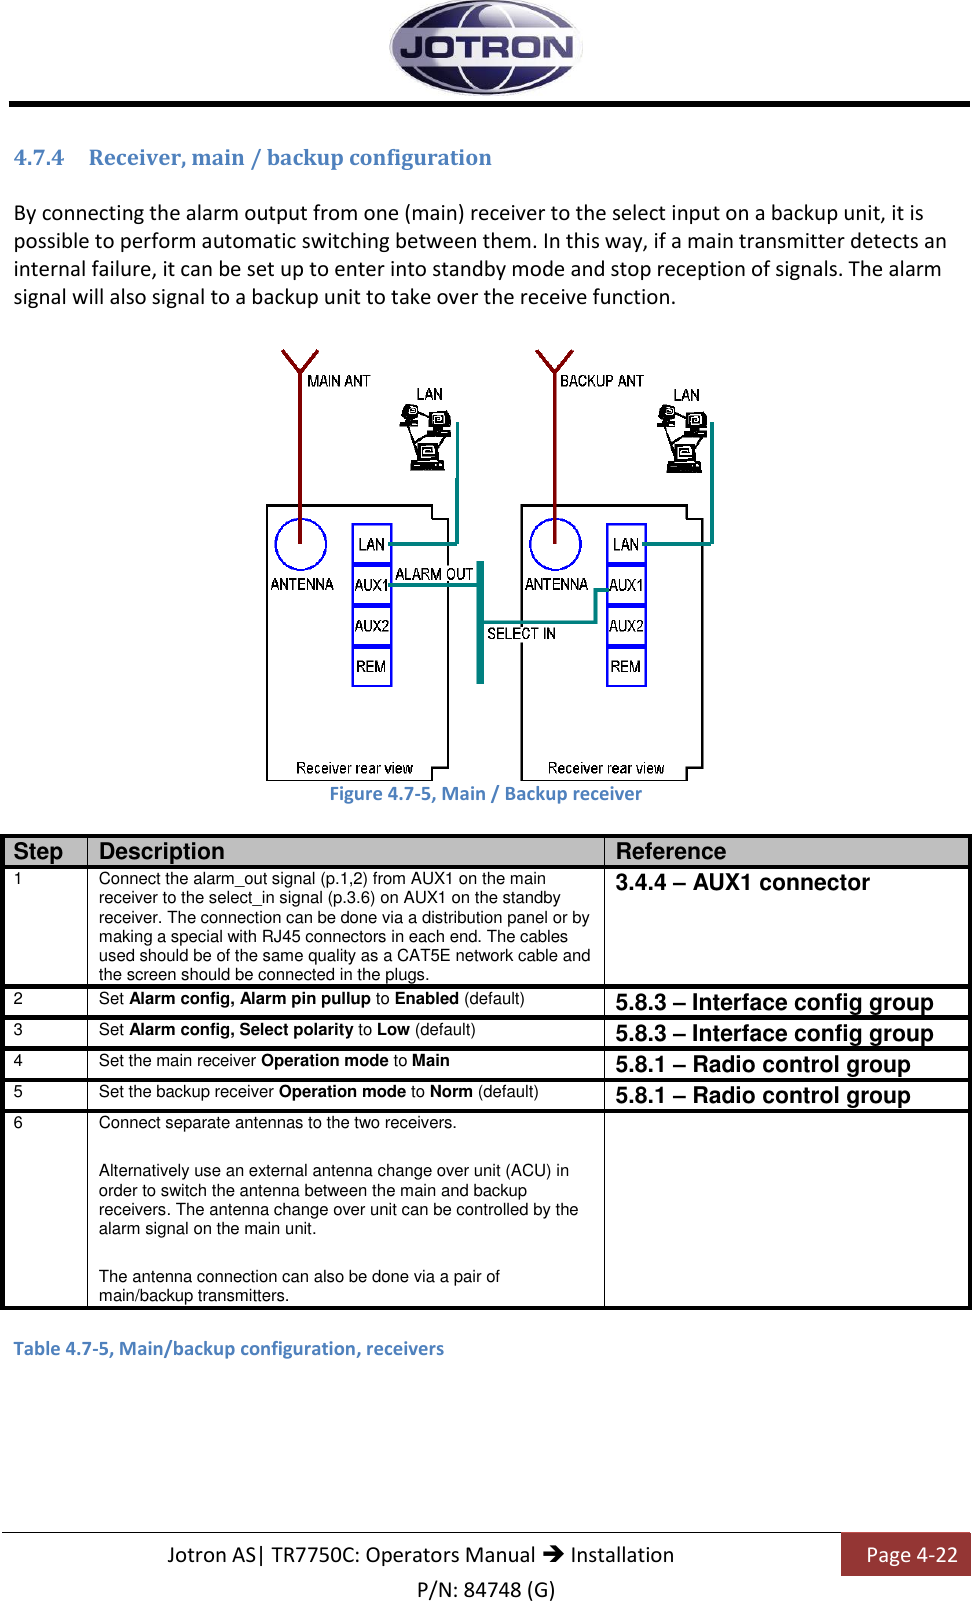   Jotron AS| TR7750C: Operators Manual  Installation Page 4-22 P/N: 84748 (G) 4.7.4 Receiver, main / backup configuration  By connecting the alarm output from one (main) receiver to the select input on a backup unit, it is possible to perform automatic switching between them. In this way, if a main transmitter detects an internal failure, it can be set up to enter into standby mode and stop reception of signals. The alarm signal will also signal to a backup unit to take over the receive function.  Figure 4.7-5, Main / Backup receiver  Step Description Reference 1 Connect the alarm_out signal (p.1,2) from AUX1 on the main receiver to the select_in signal (p.3.6) on AUX1 on the standby receiver. The connection can be done via a distribution panel or by making a special with RJ45 connectors in each end. The cables used should be of the same quality as a CAT5E network cable and the screen should be connected in the plugs. 3.4.4 – AUX1 connector 2 Set Alarm config, Alarm pin pullup to Enabled (default) 5.8.3 – Interface config group 3 Set Alarm config, Select polarity to Low (default) 5.8.3 – Interface config group 4 Set the main receiver Operation mode to Main  5.8.1 – Radio control group 5 Set the backup receiver Operation mode to Norm (default) 5.8.1 – Radio control group 6 Connect separate antennas to the two receivers. Alternatively use an external antenna change over unit (ACU) in order to switch the antenna between the main and backup receivers. The antenna change over unit can be controlled by the alarm signal on the main unit. The antenna connection can also be done via a pair of main/backup transmitters.   Table 4.7-5, Main/backup configuration, receivers  